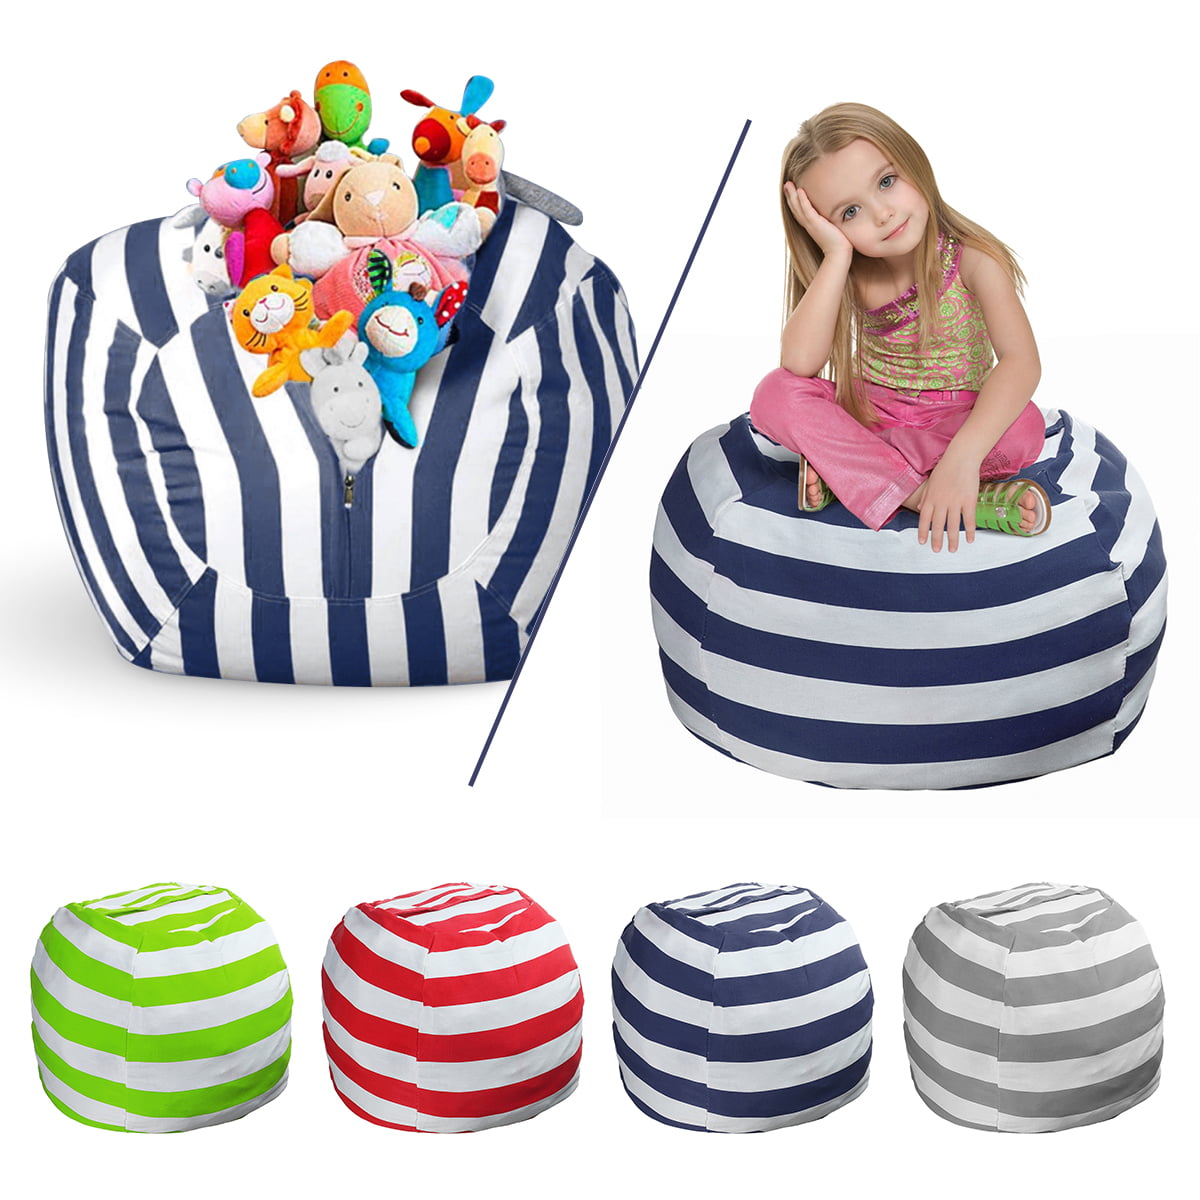 Blue Dreamseden Dual-use Toy Organization Seat Set for Kids Striped Stuffed Animal Storage Bag Chair 24.0 in & 15.7 in